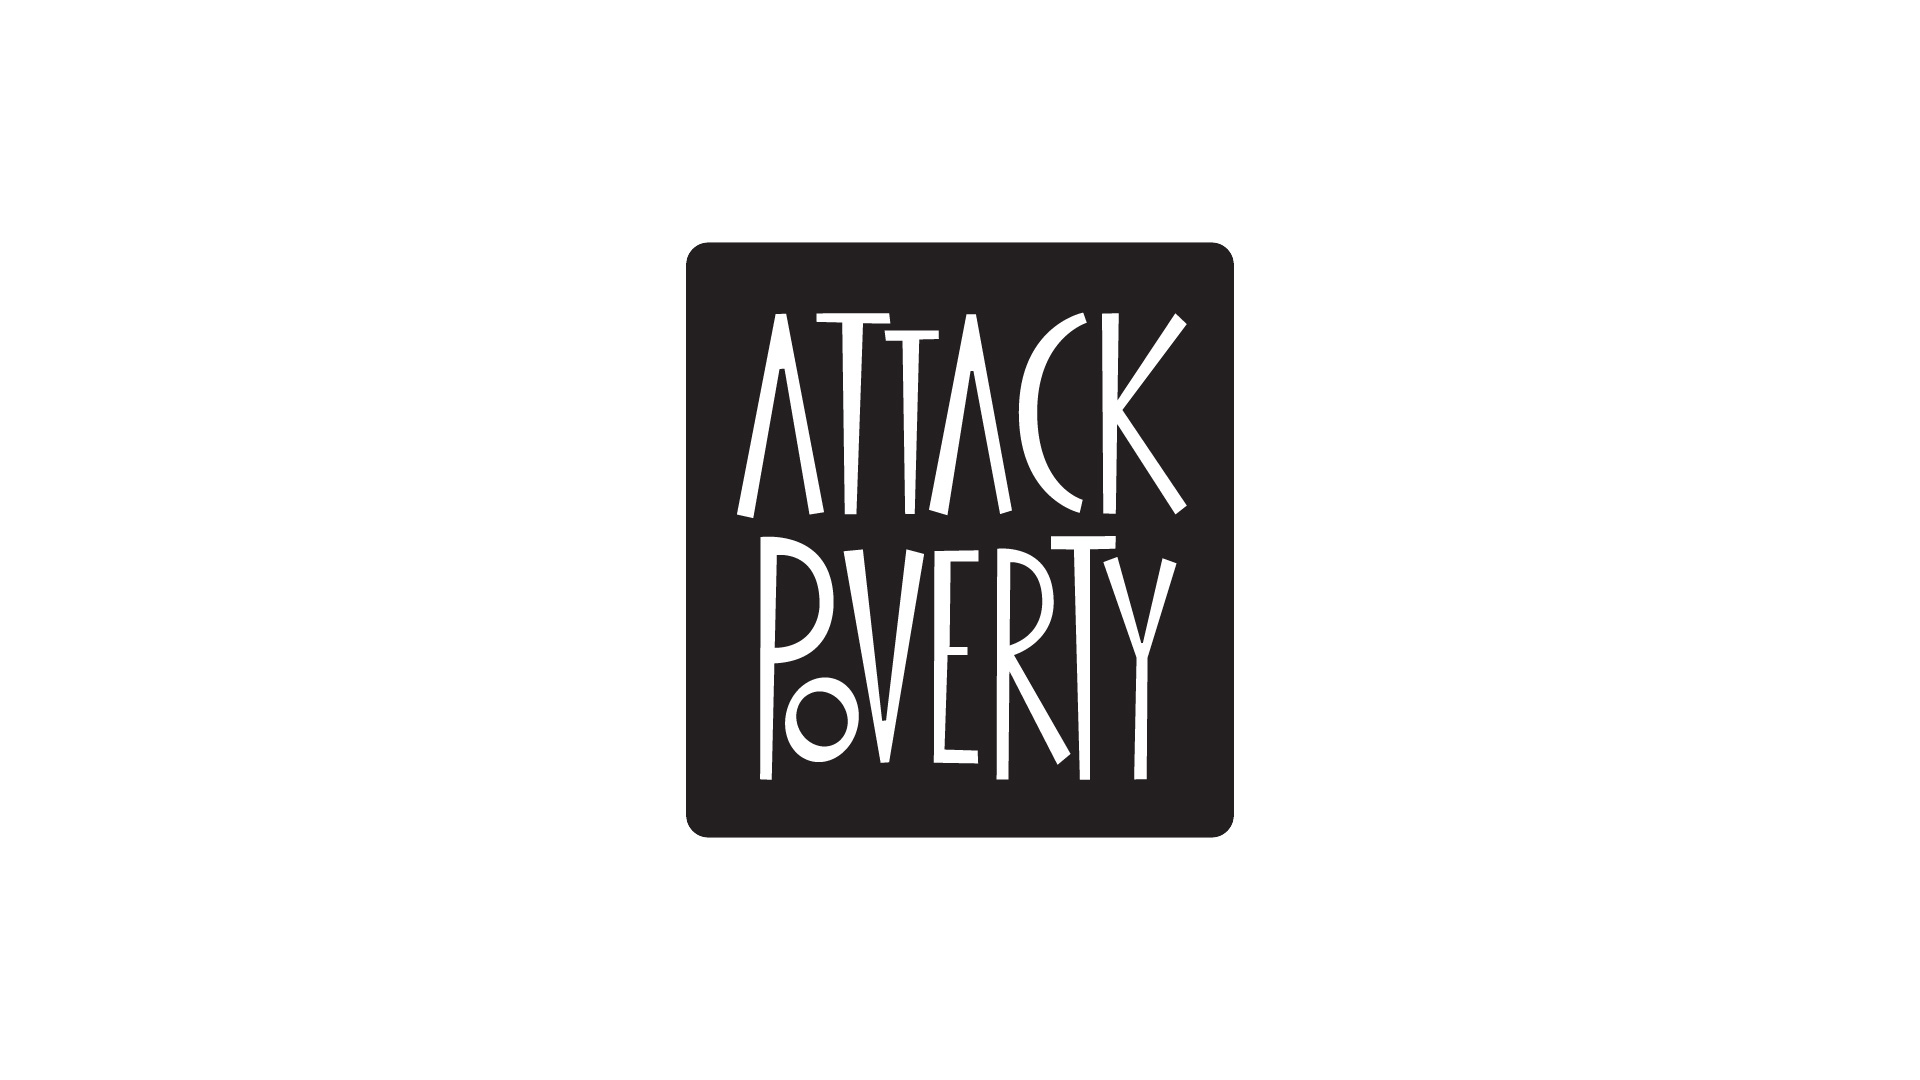 AttackPoverty